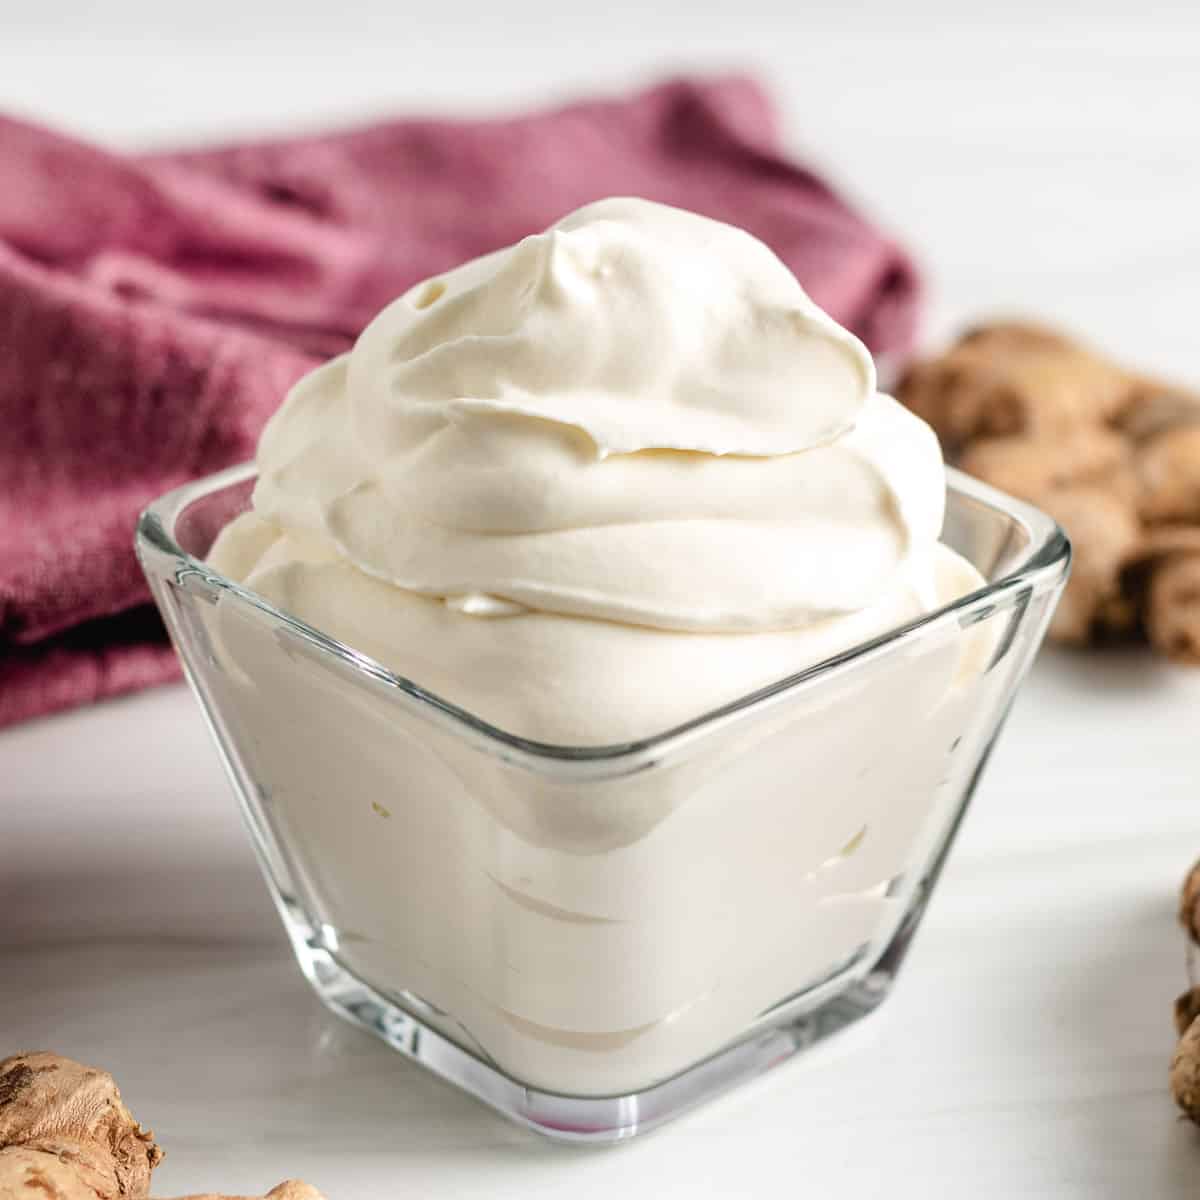 Ginger infused whipped cream